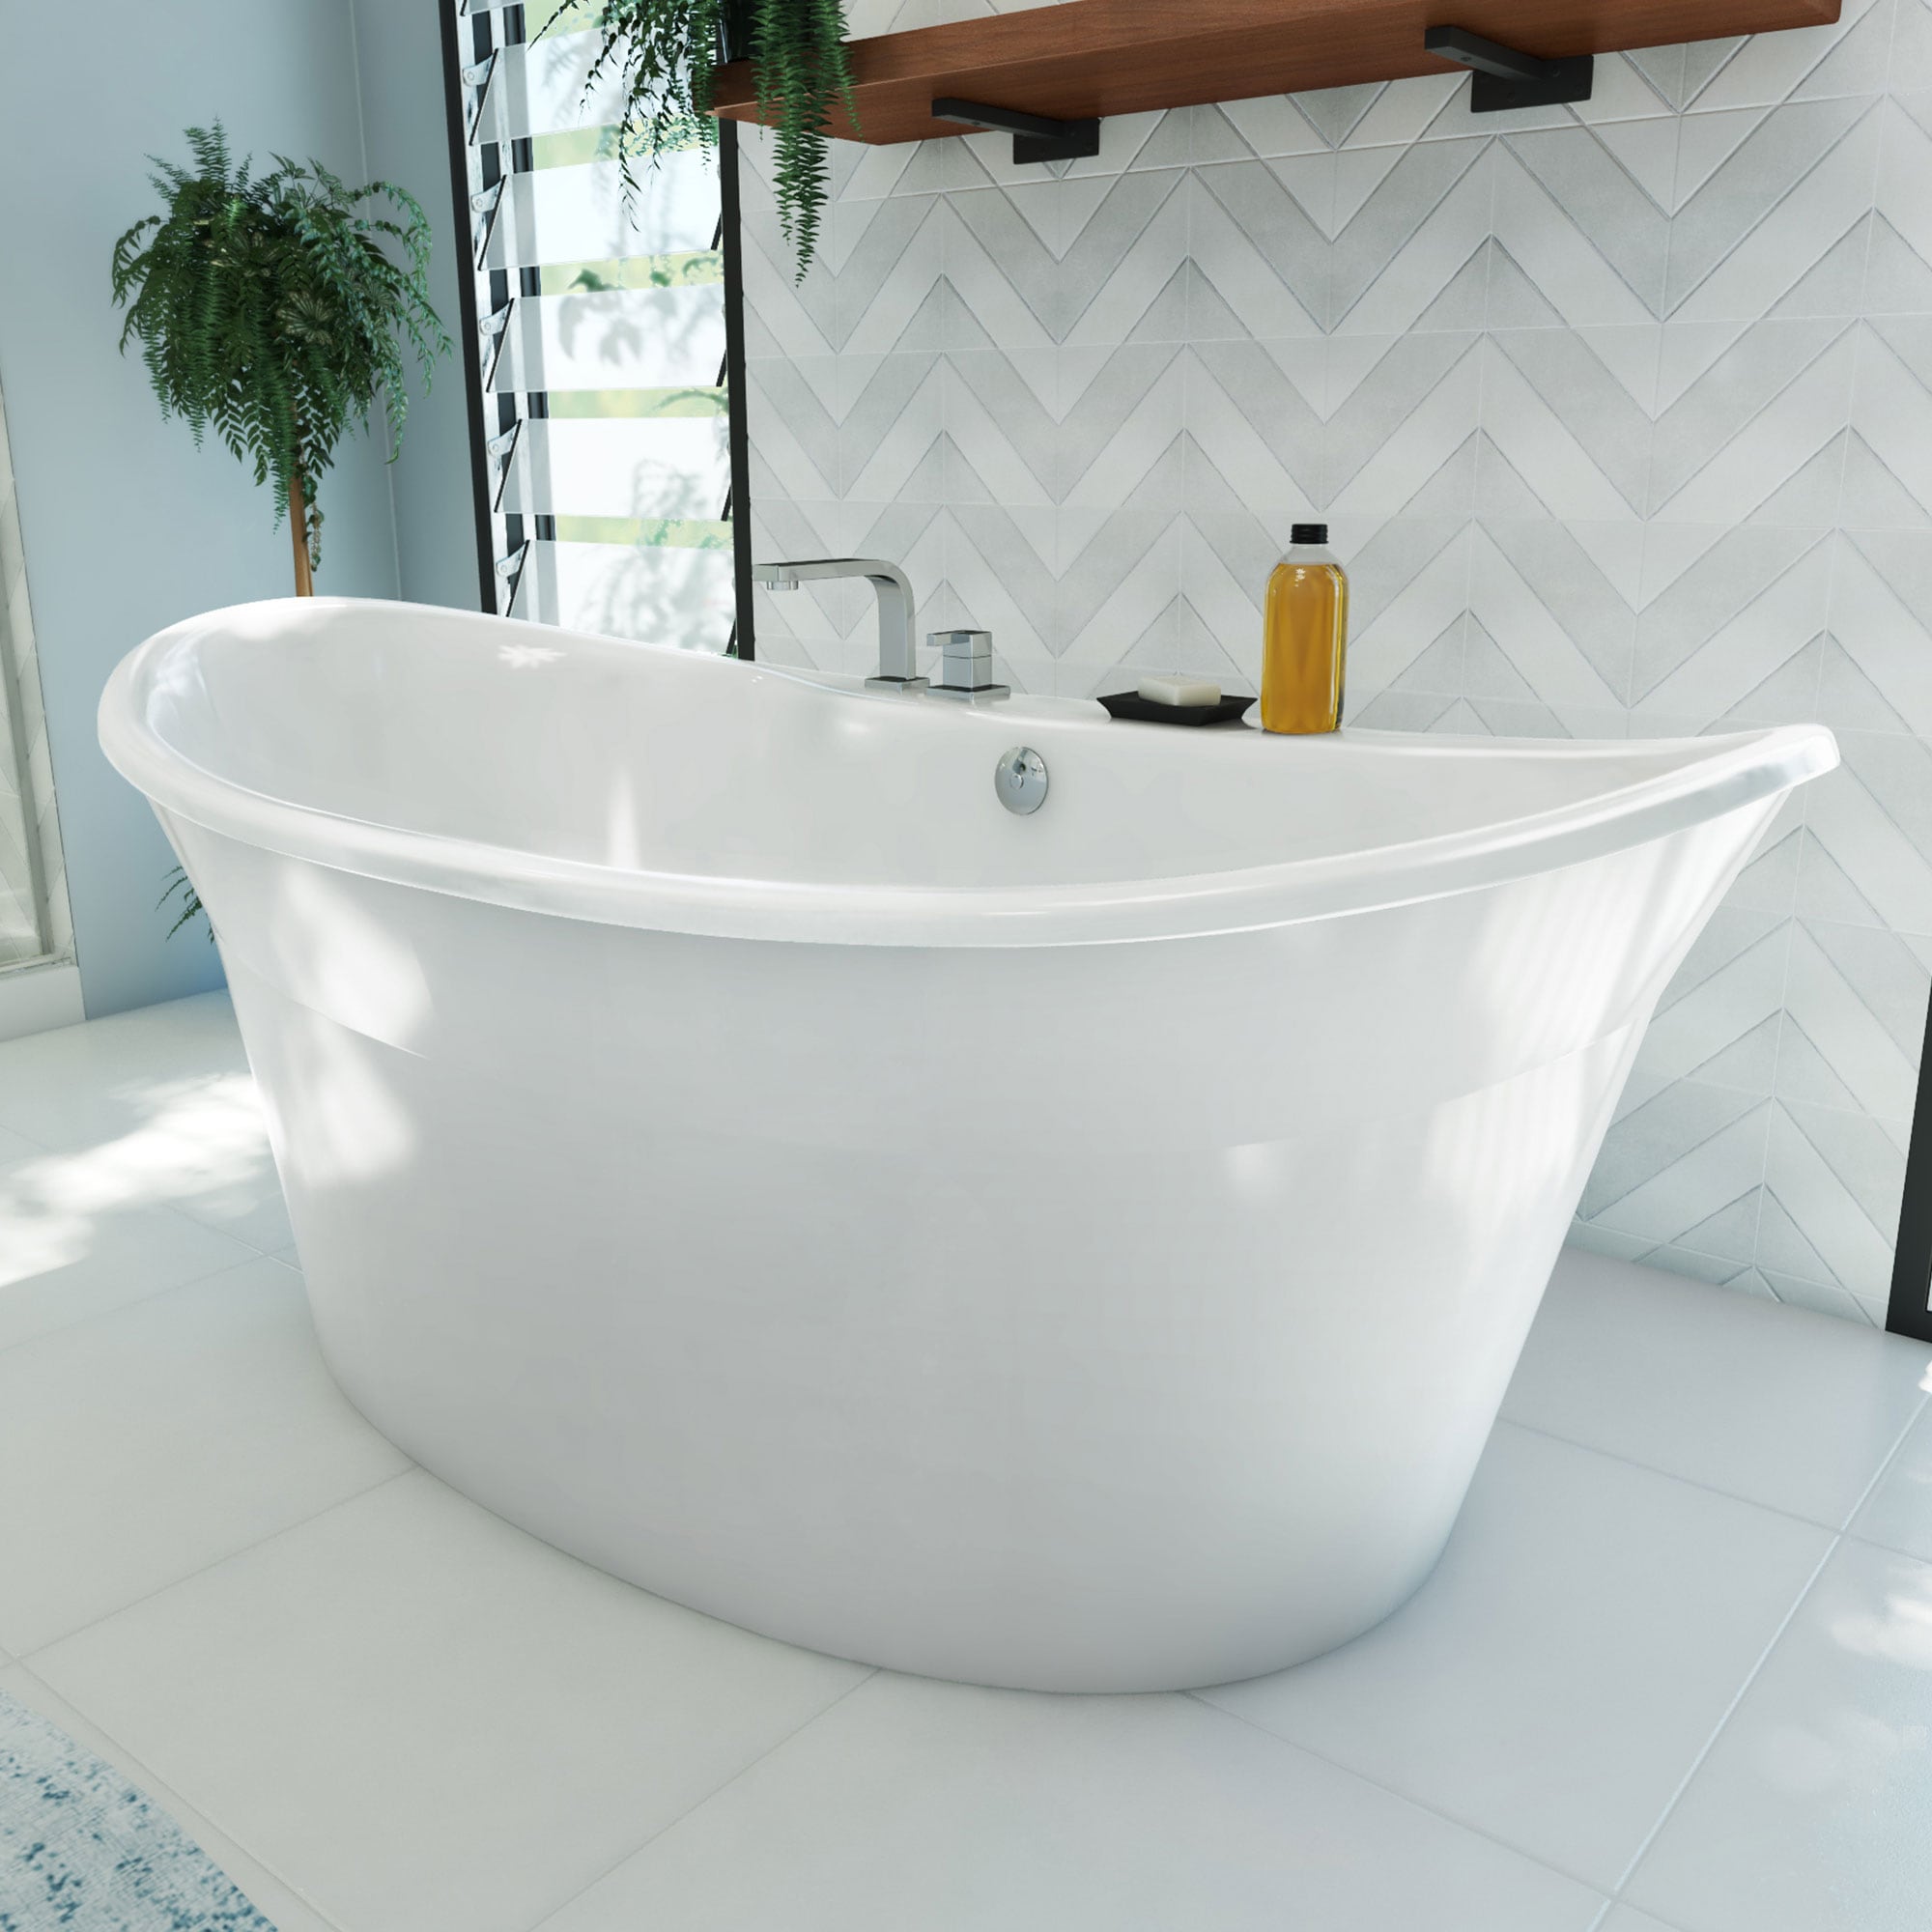 DreamLine Montego 36-in W x 66-in L White Acrylic Oval Drain Freestanding Soaking Bathtub in the Bathtubs department at Lowes.com